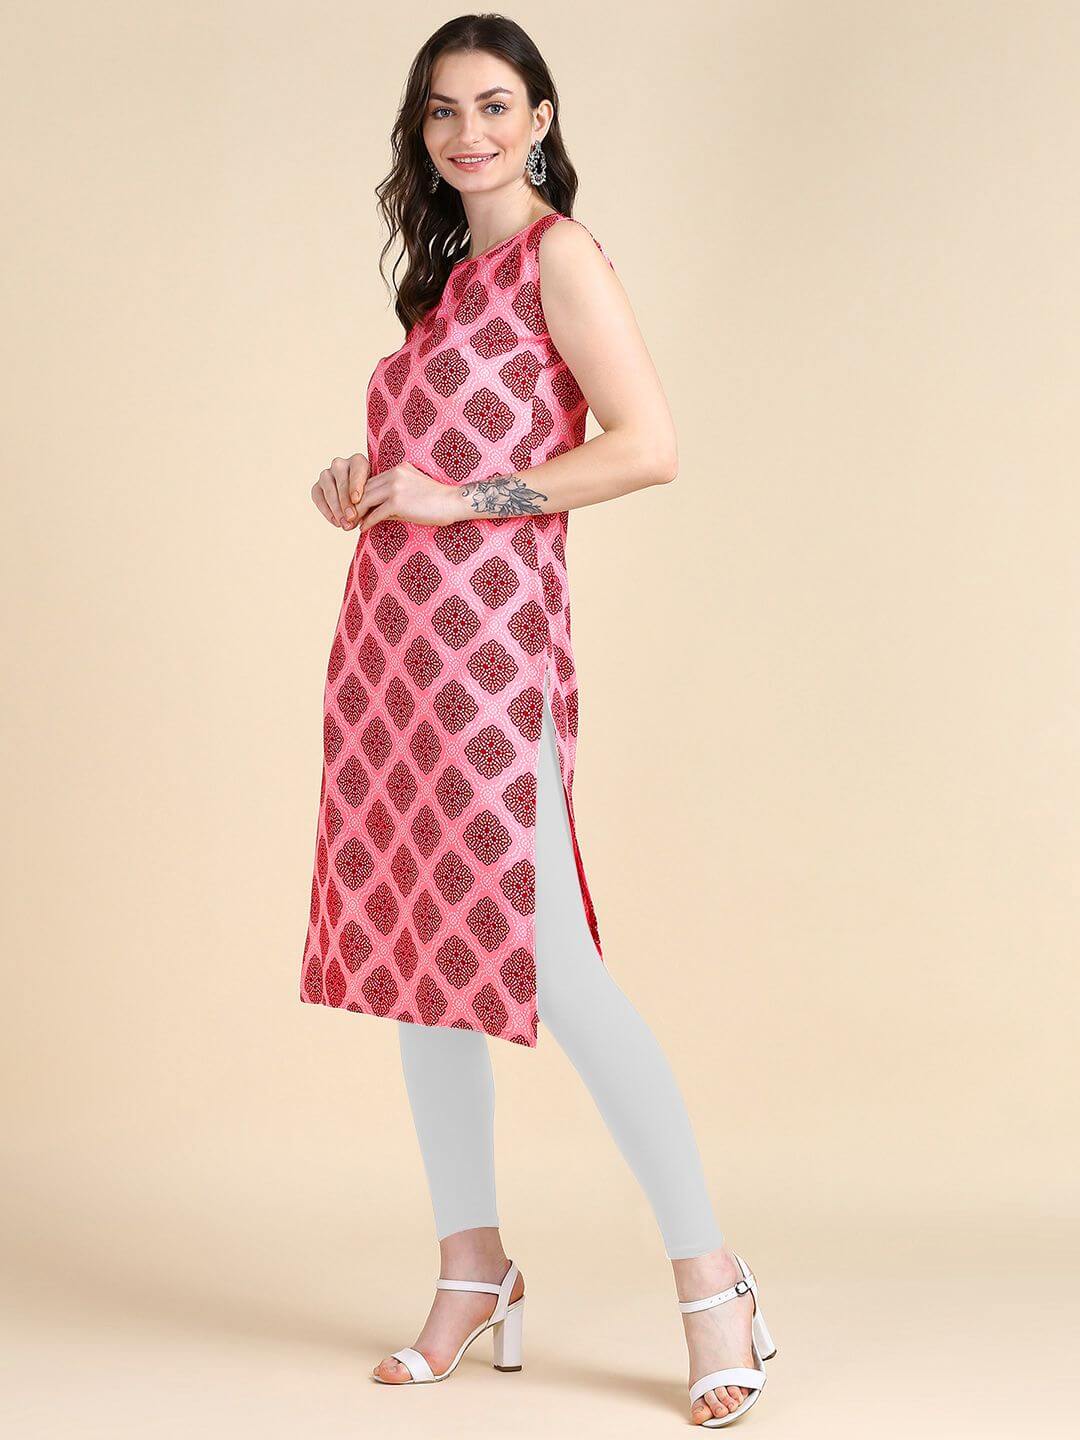 Buy Lynmo Fashion Women's Cotton 3/4 Sleeve Boat Neck Calf Length Solid  Kurti (W-129_Baby Pink_M) at Amazon.in